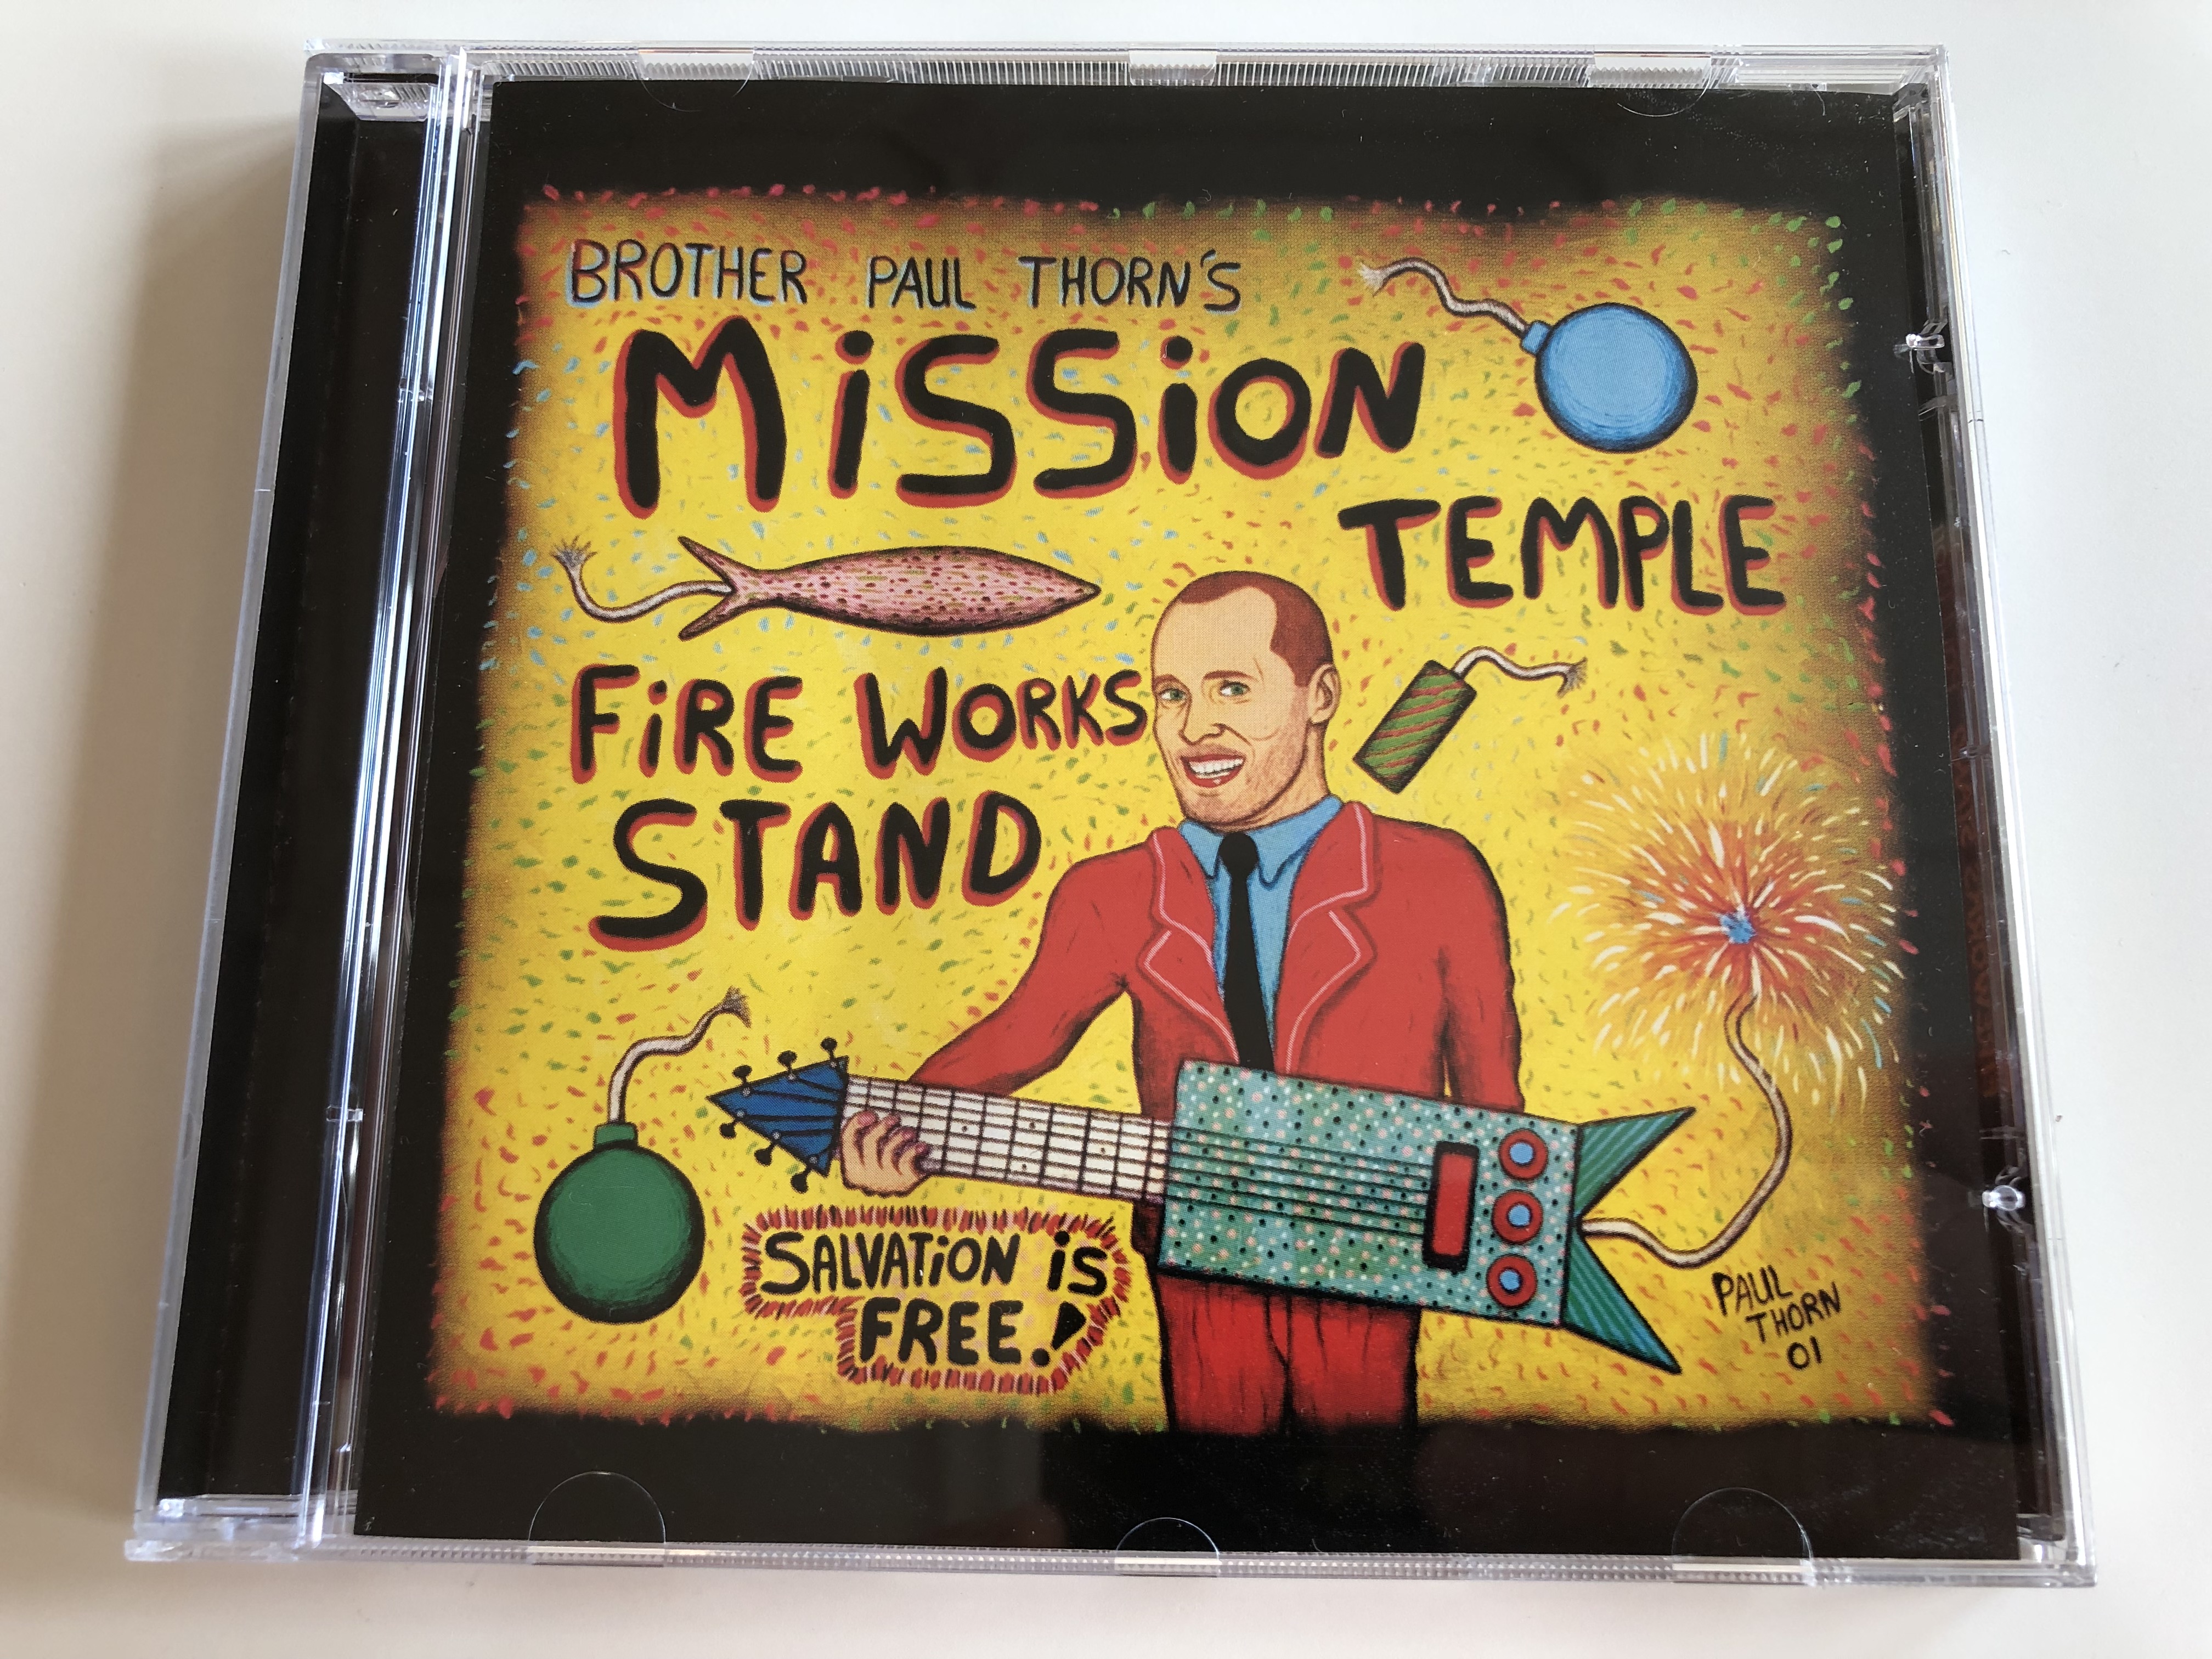 brother-paul-thorn-s-mission-temple-fireworks-stand-salvation-is-free-perpetual-obscurity-records-audio-cd-2002-724381305126-1-.jpg